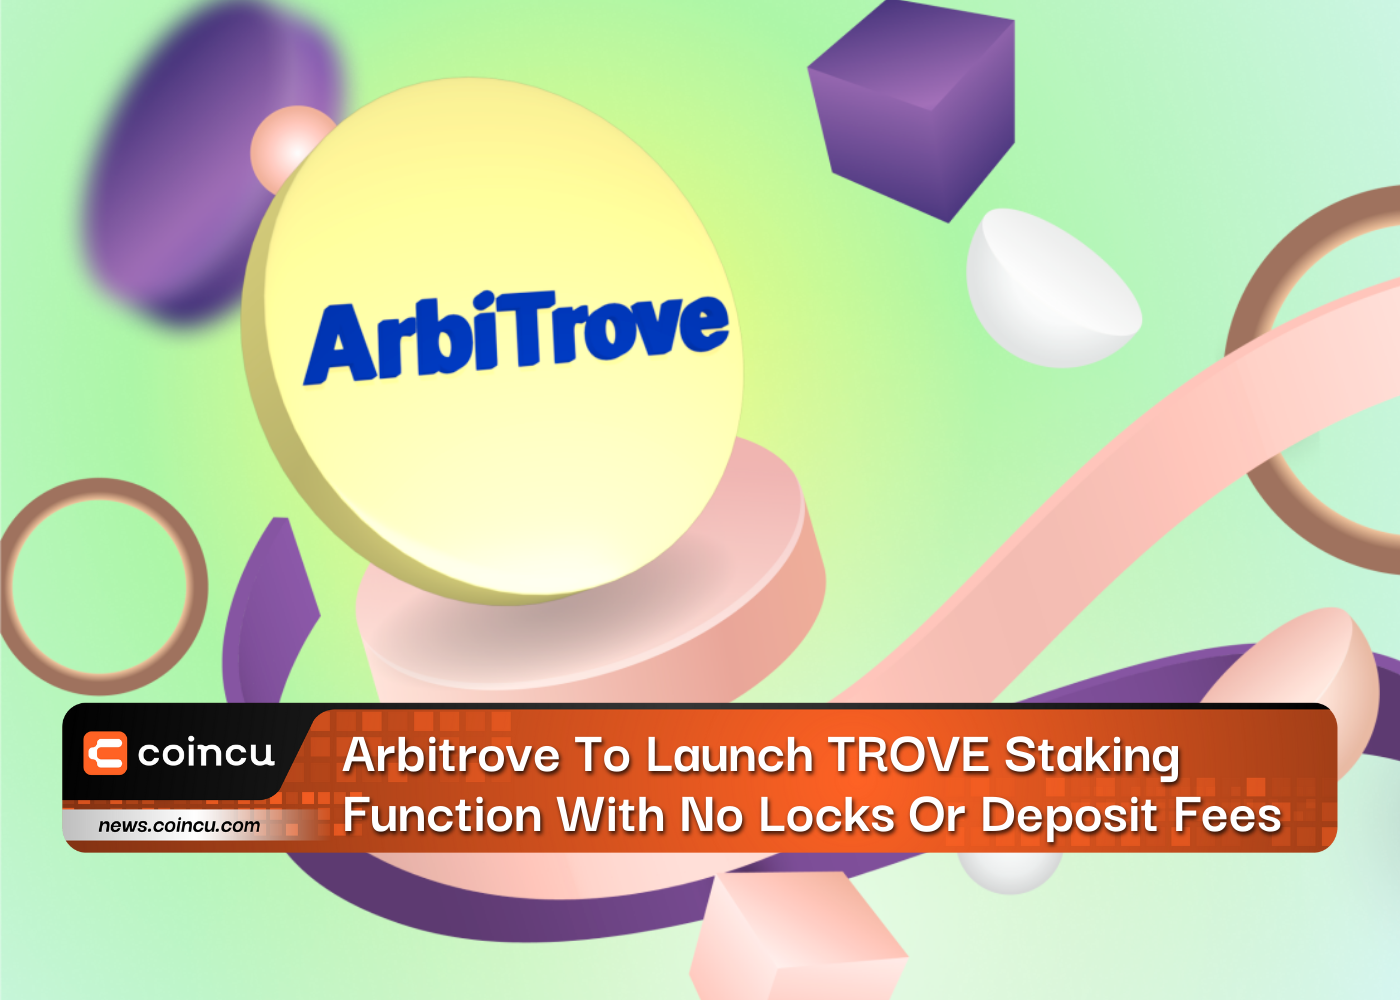 Arbitrove To Launch TROVE Staking Function With No Locks Or Deposit Fees